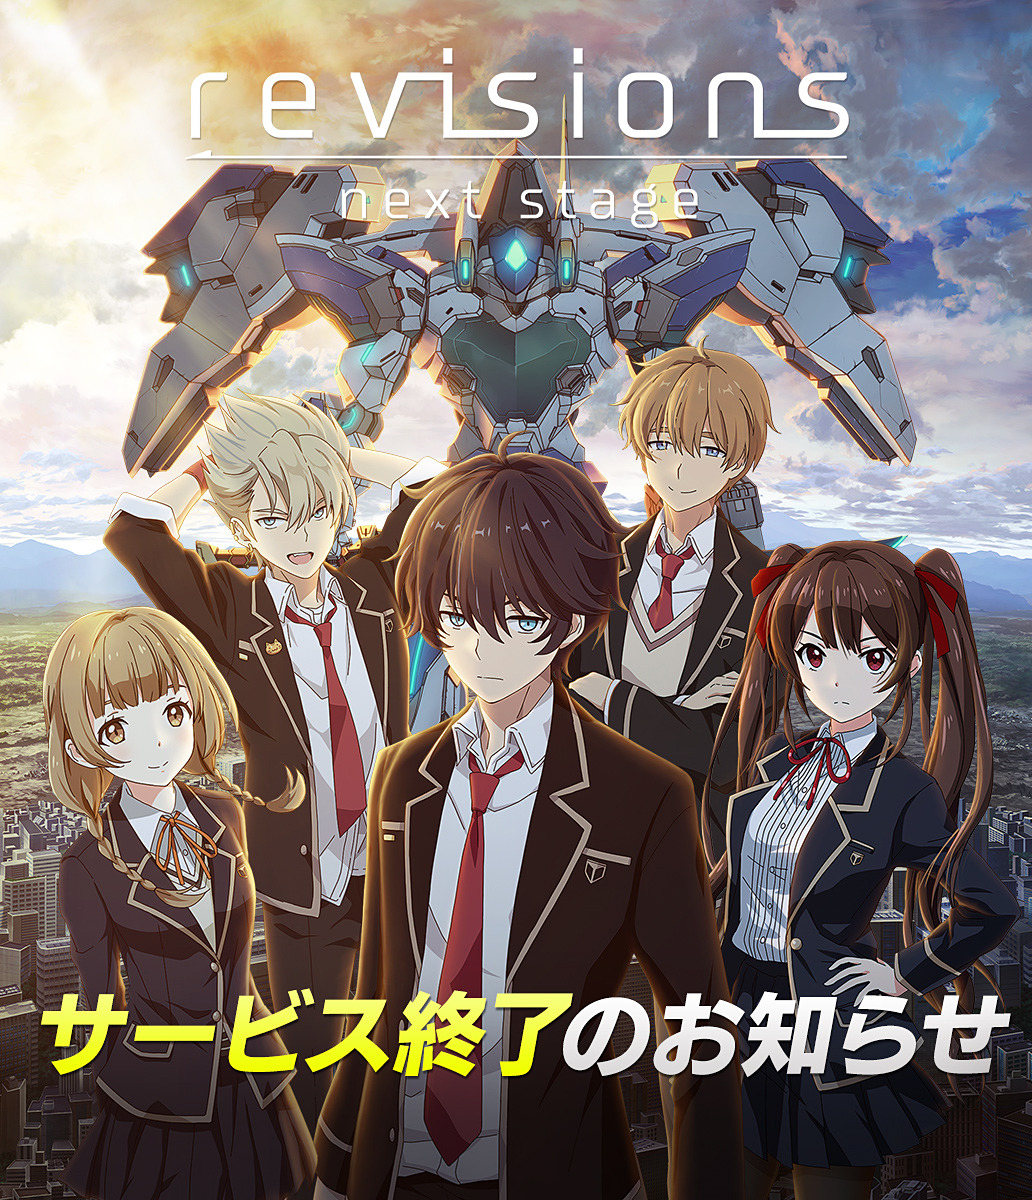 revisions リヴィジョンズ　未開封輸入盤Blu-ray